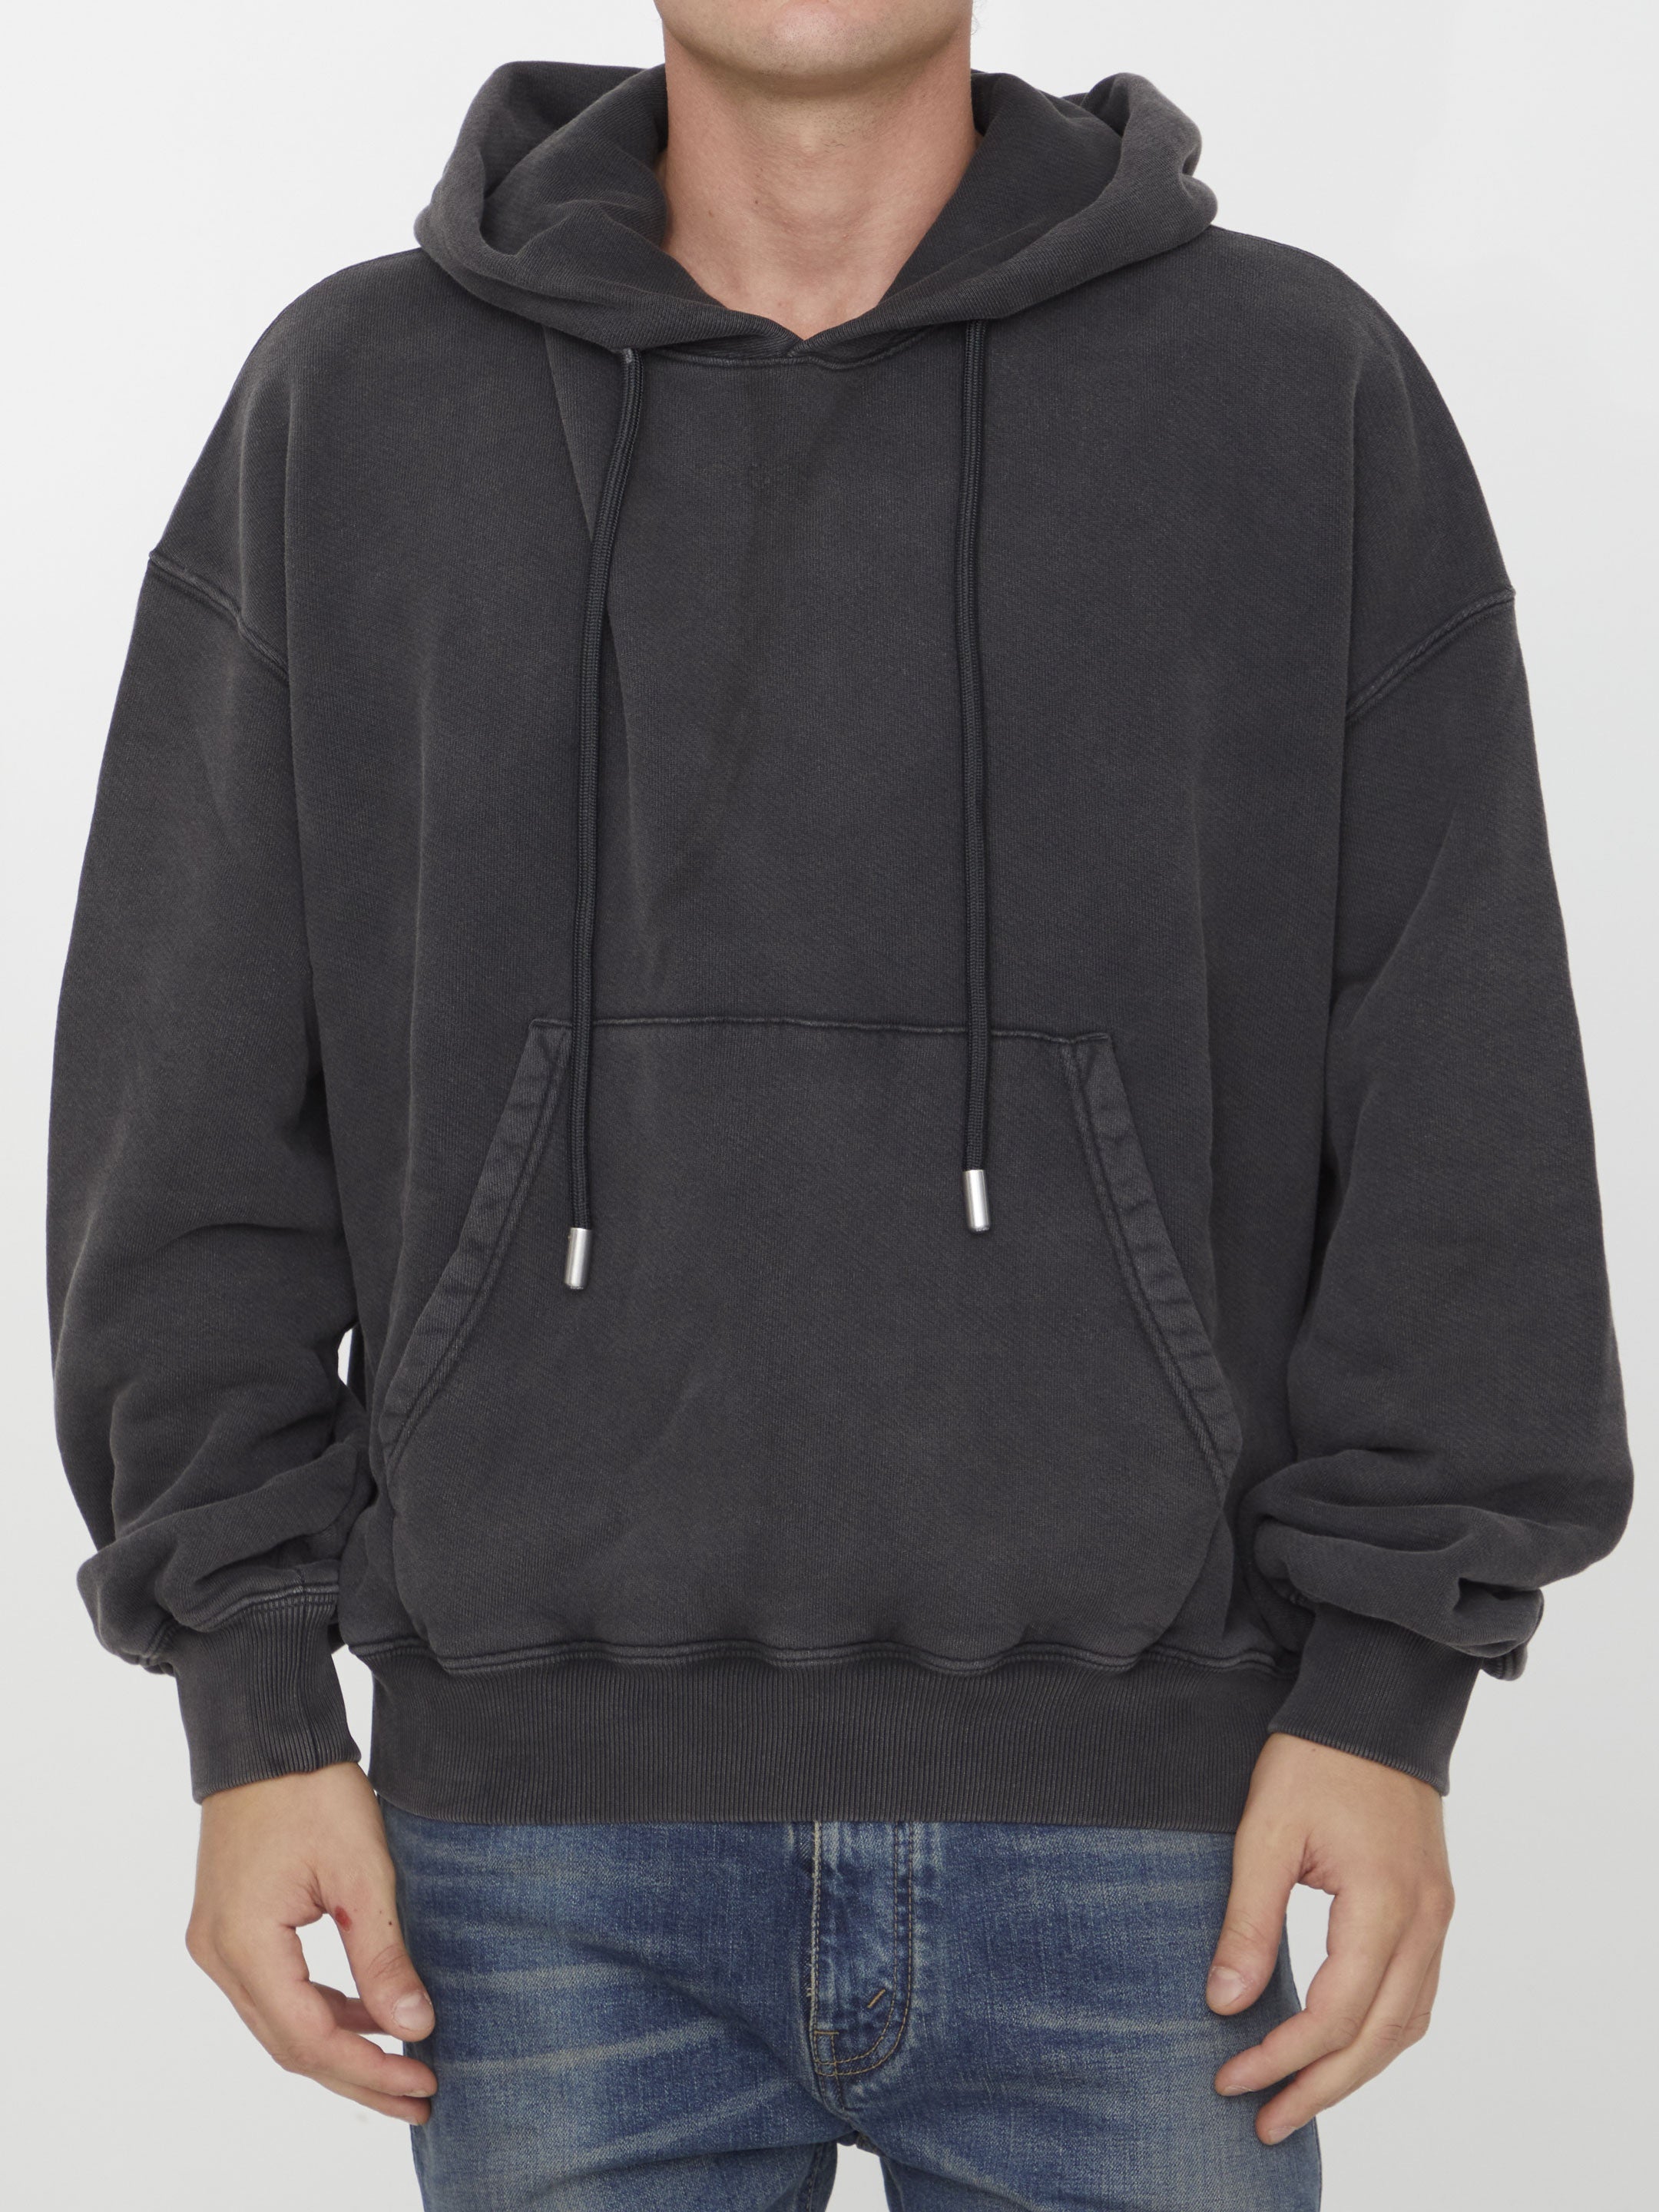 OFF-WHITE-OUTLET-SALE-Super-Moon-hoodie-Strick-XS-BLACK-ARCHIVE-COLLECTION.jpg